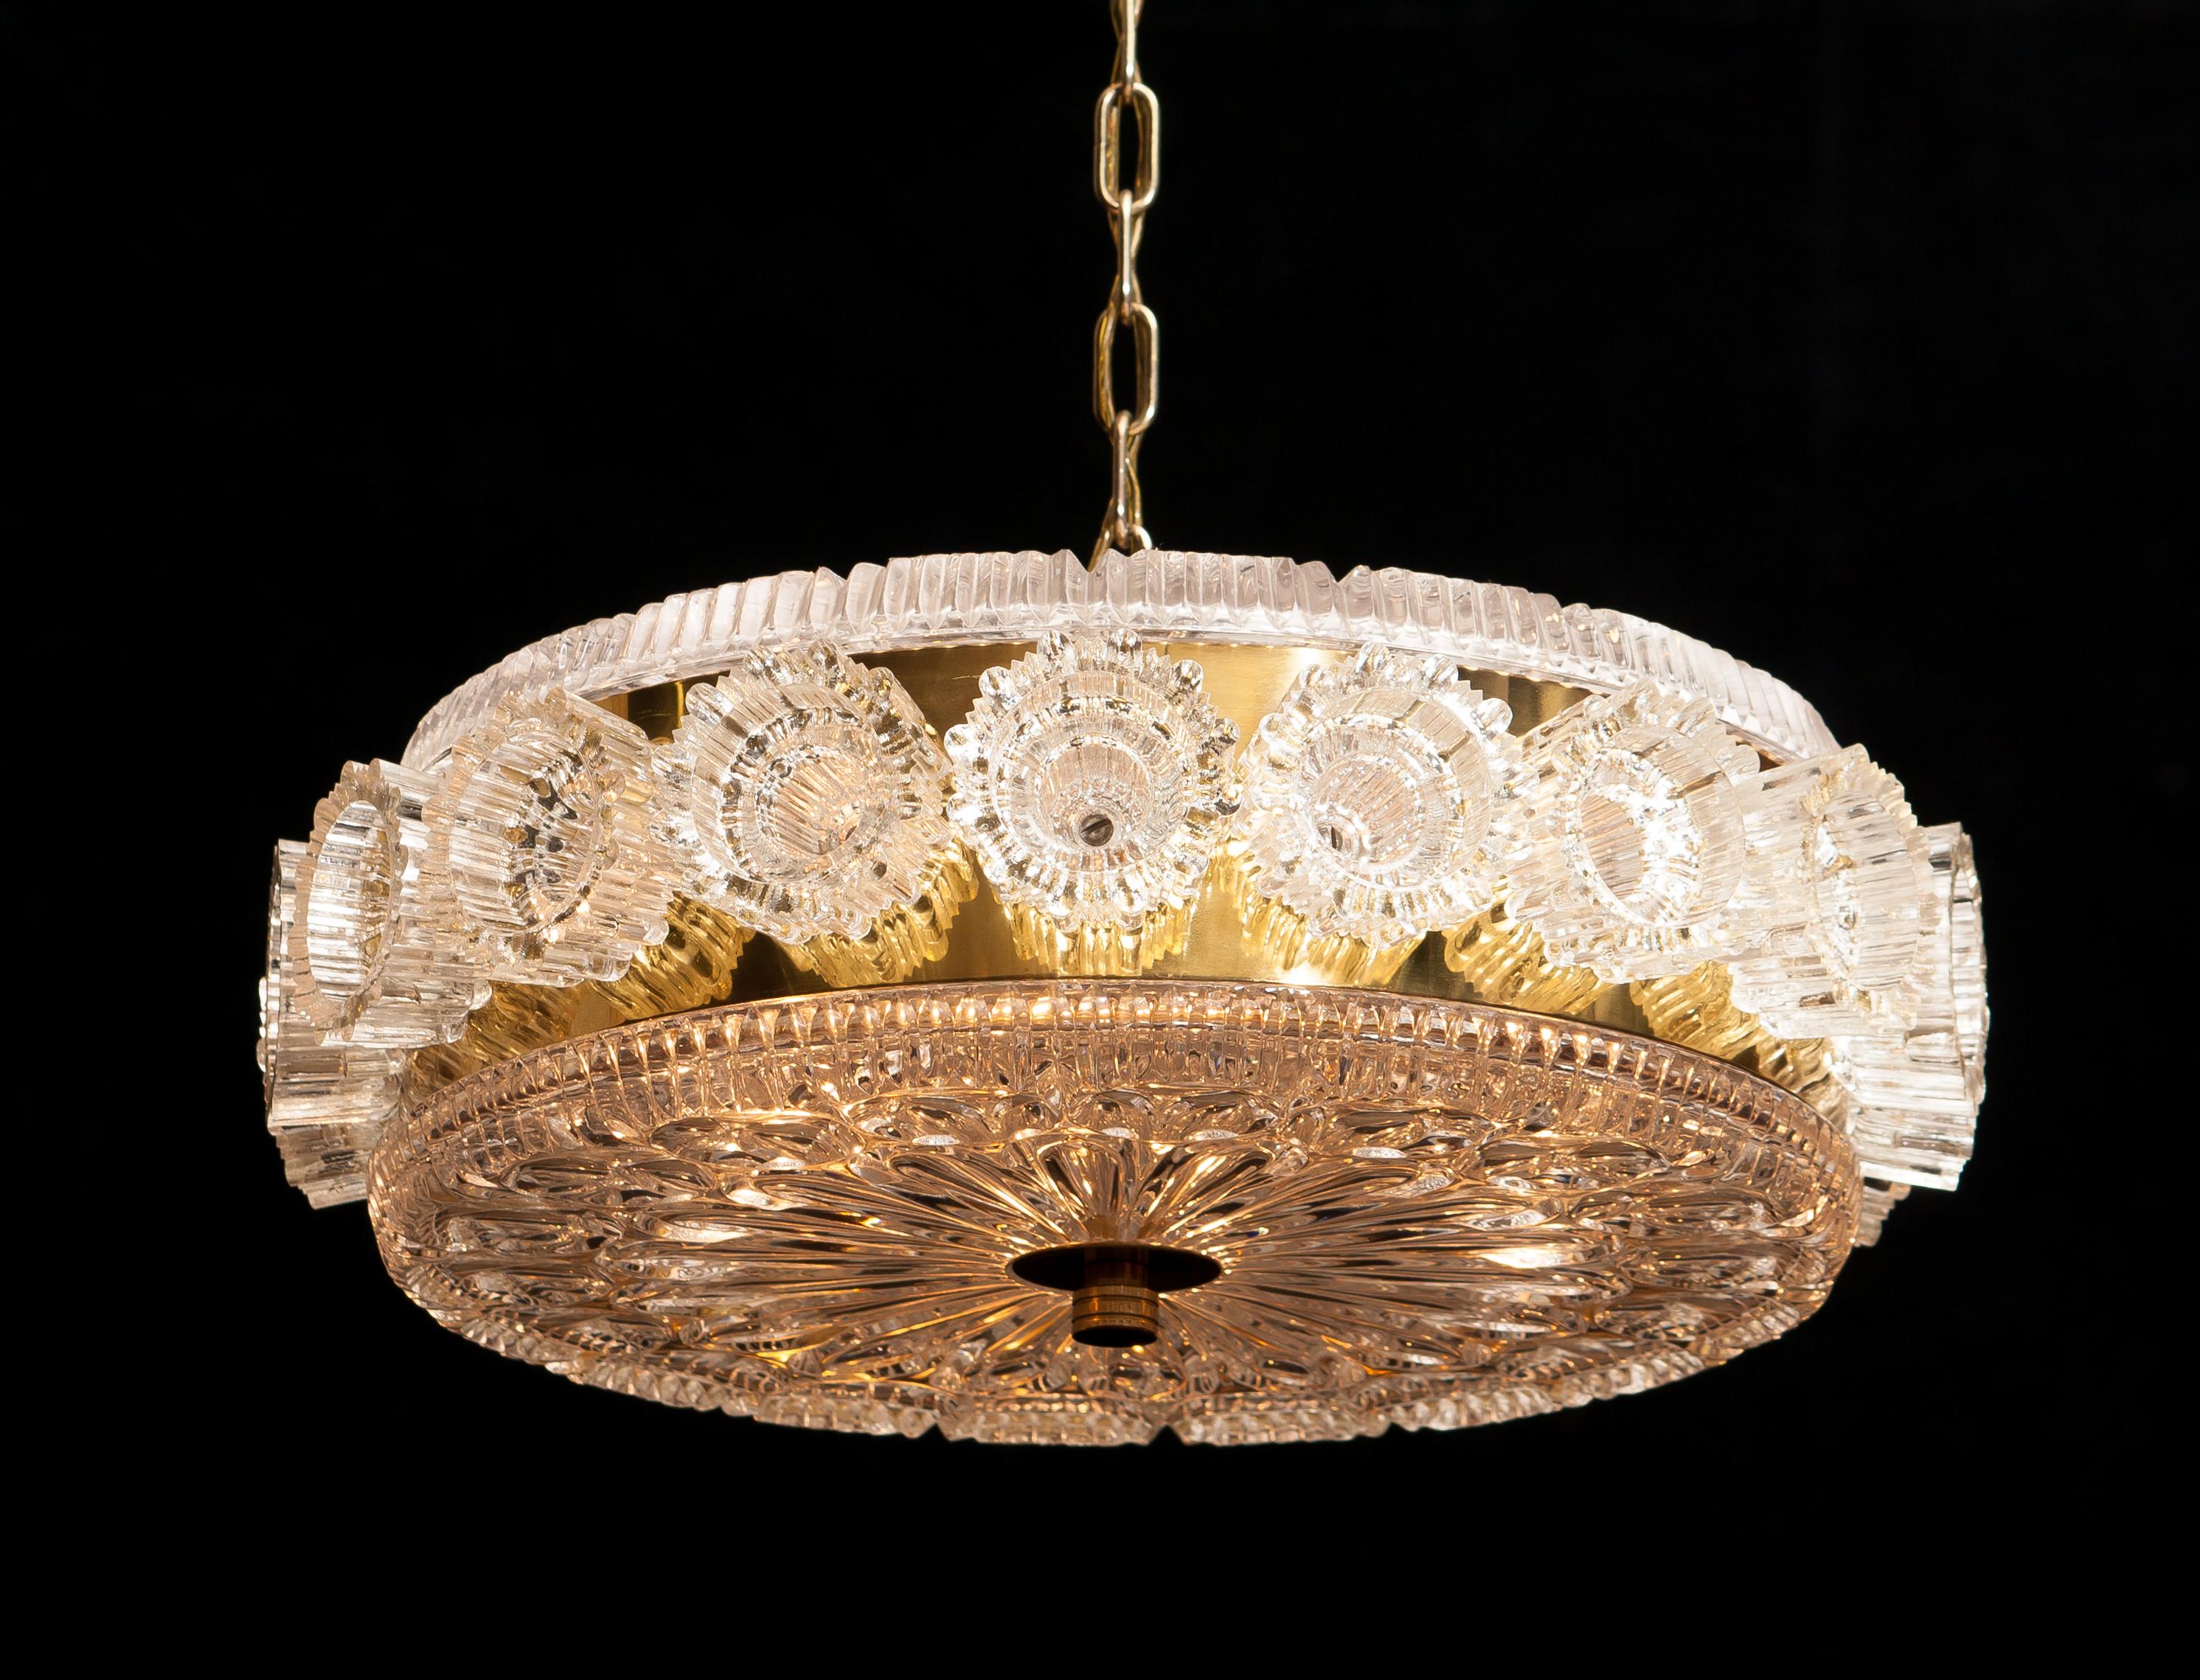 Beautiful lamp designed by Carl Fagerlund for Orrefors, Sweden.
This pendant is made of brass and lovely 'flowers' of glass on the edge.
The total height is 112 cm but it is easy to make the chain shorter.
It is in a very nice condition.
Period: